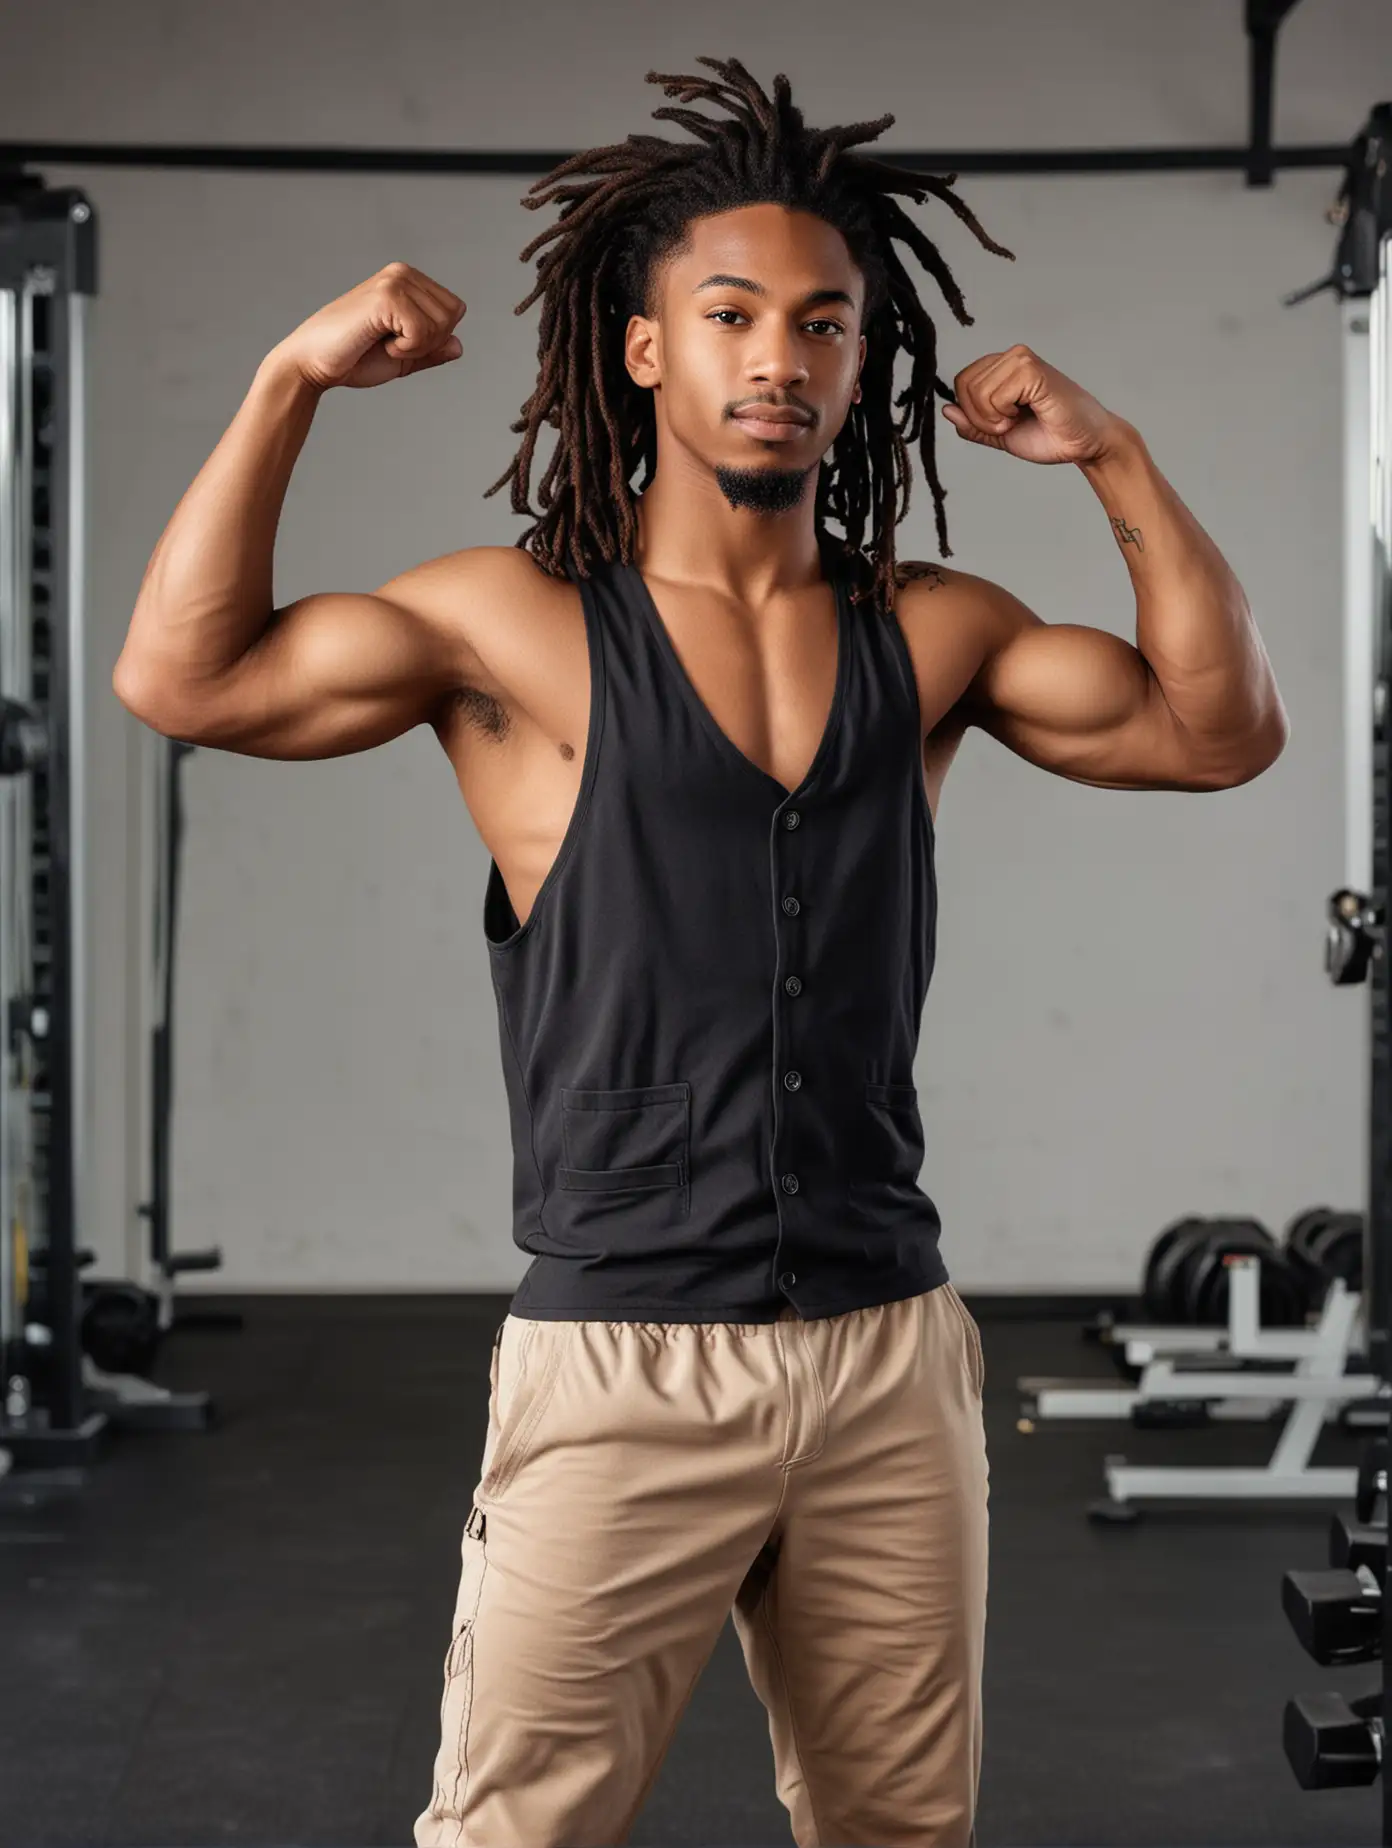 African American Boy Flexing Muscles in Gym with Professional Photography